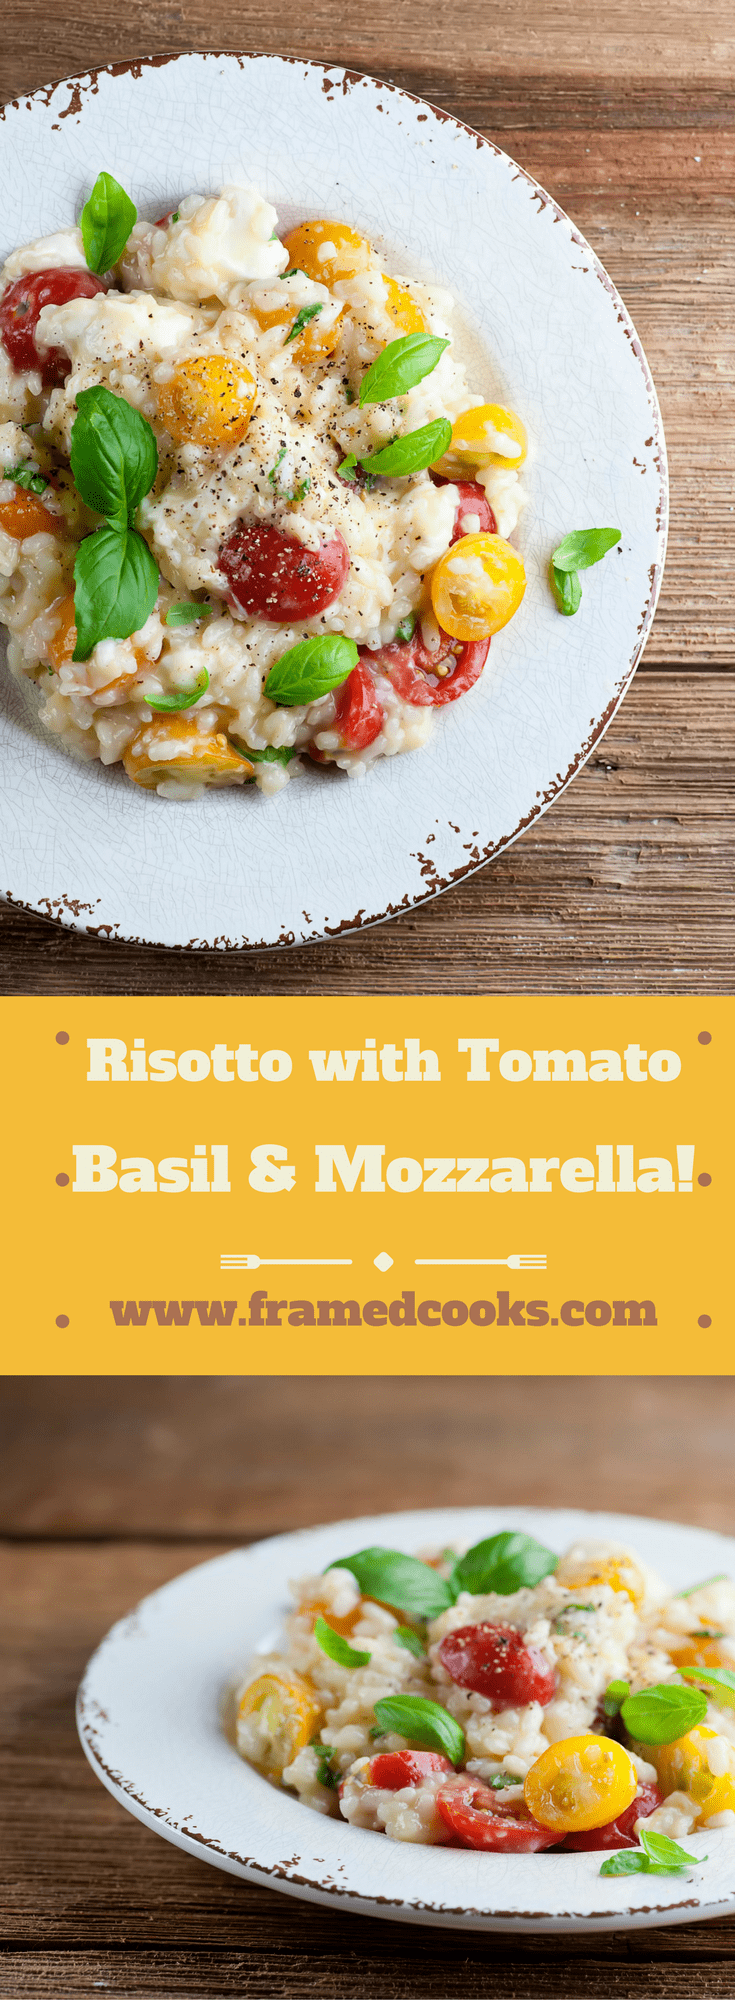 Risotto with Tomato, Basil and Mozzarella - Framed Cooks